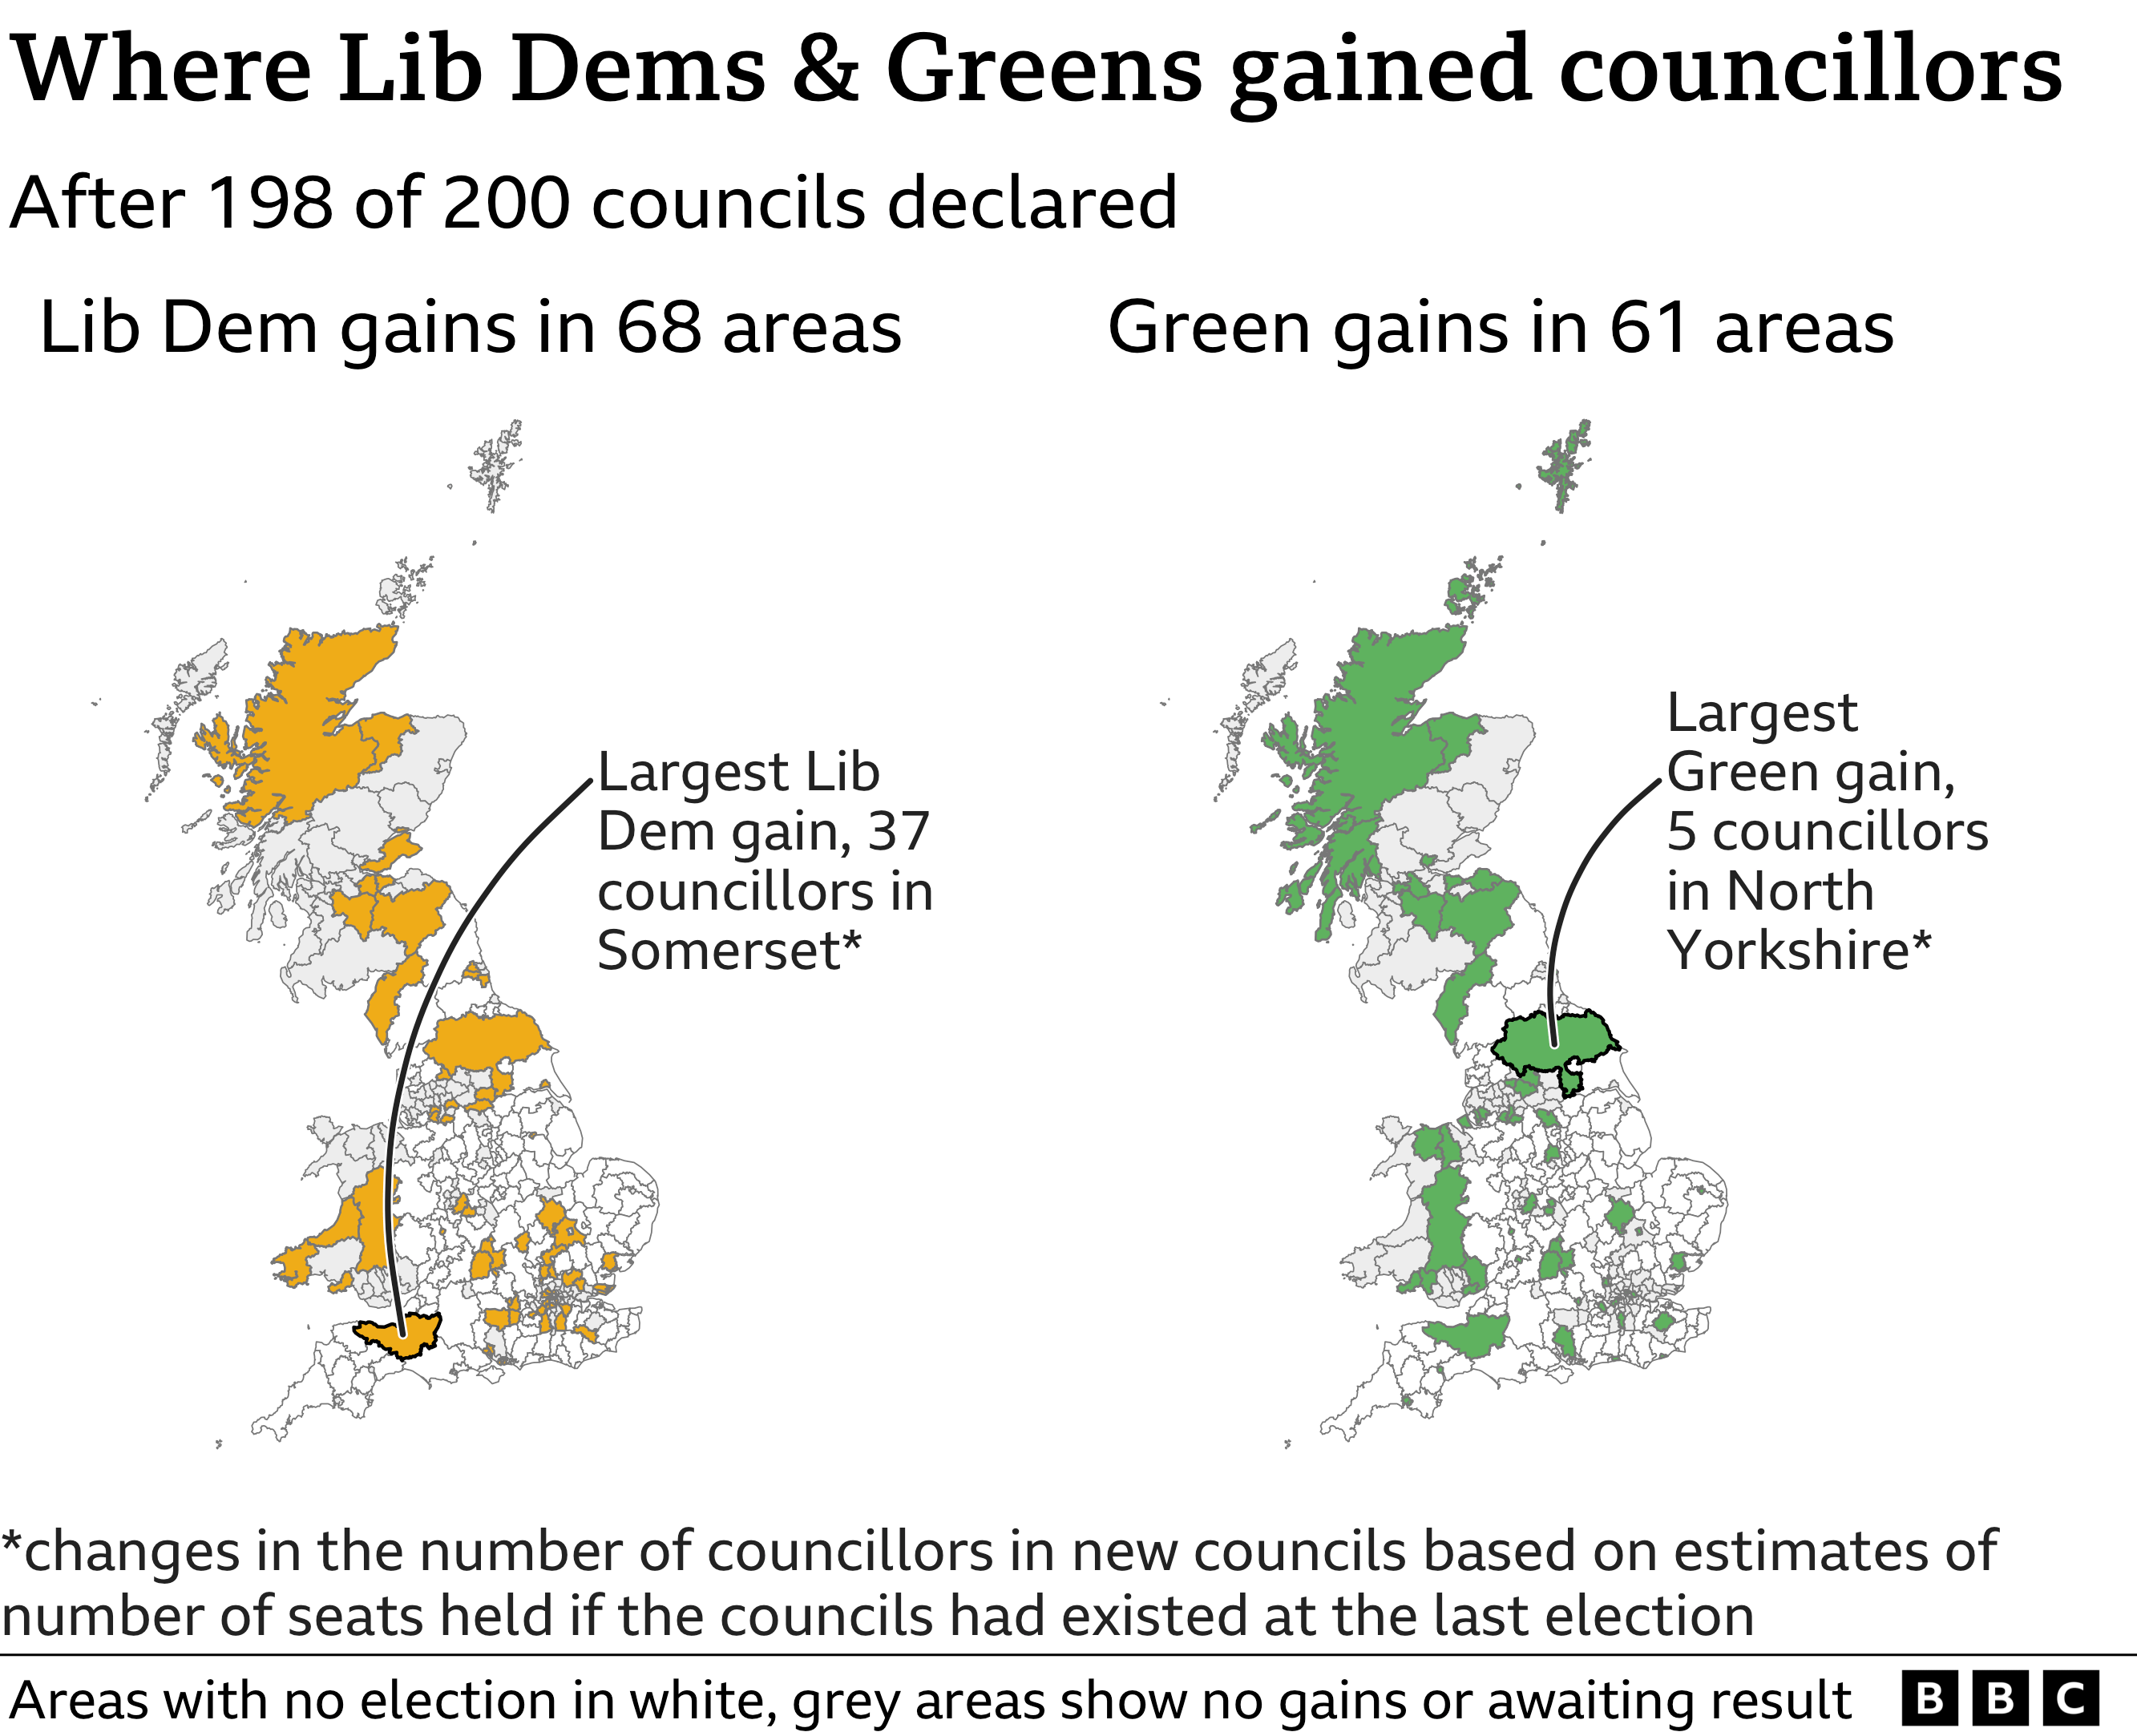 Map showing where Lib Dems & Greens gained councillors Lib Dem gains in 68 areas, Green gains in 61 areas Largest Lib Dem gain, 37 councillors in Somerset*, Largest Green gain, 5 councillors in North Yorkshire* Changes in the number of councillors in new councils based on estimates of number of seats held if the councils had existed at the last election